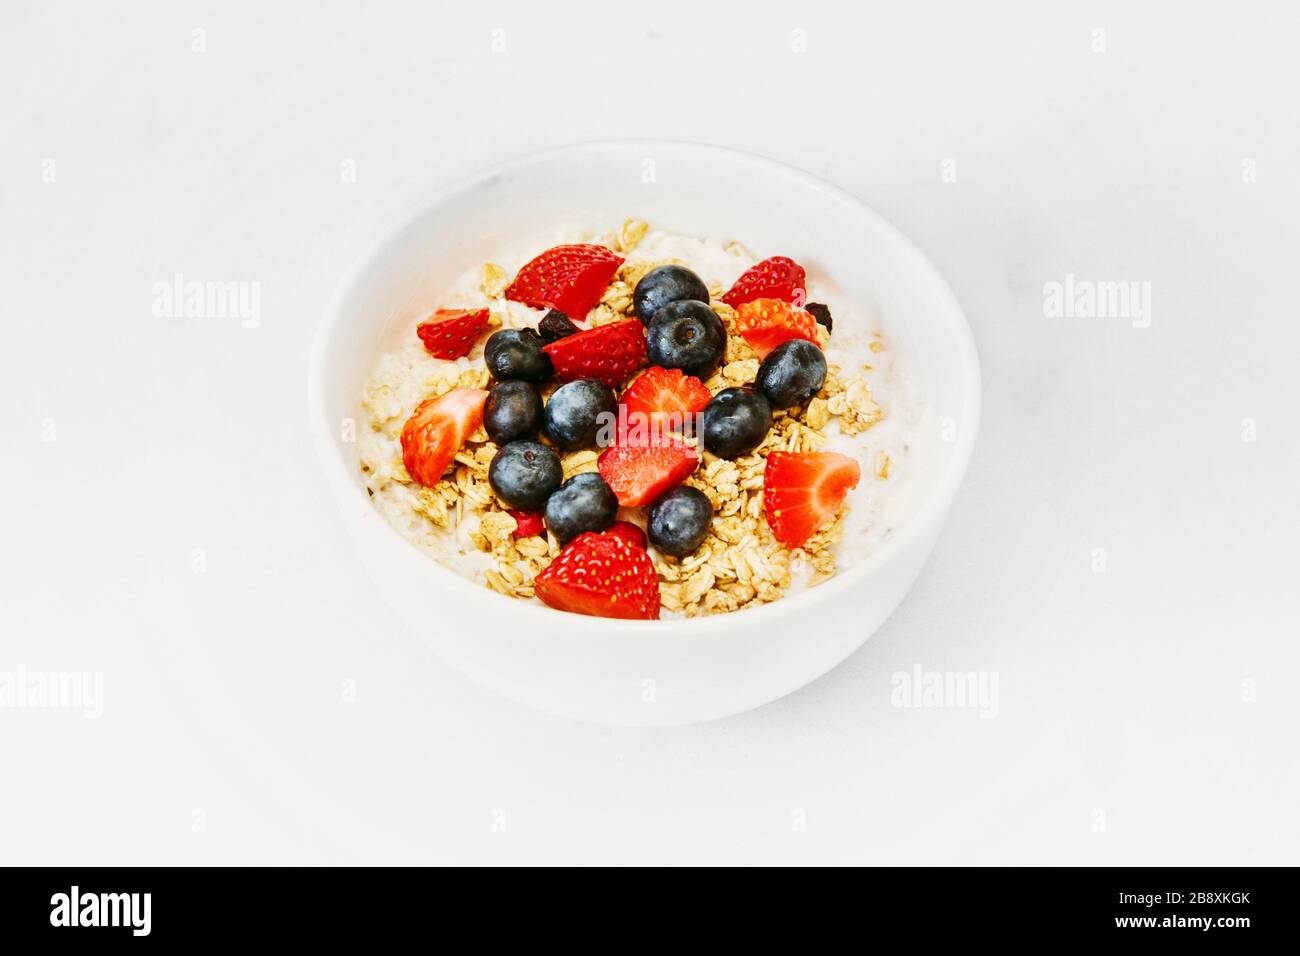 A Healthy Happy Oatmeal Breakfast for a time of isolation. A Bowl of oats, granola, strawberry, blueberries, yogurt, white bowl, with white background Stock Photo